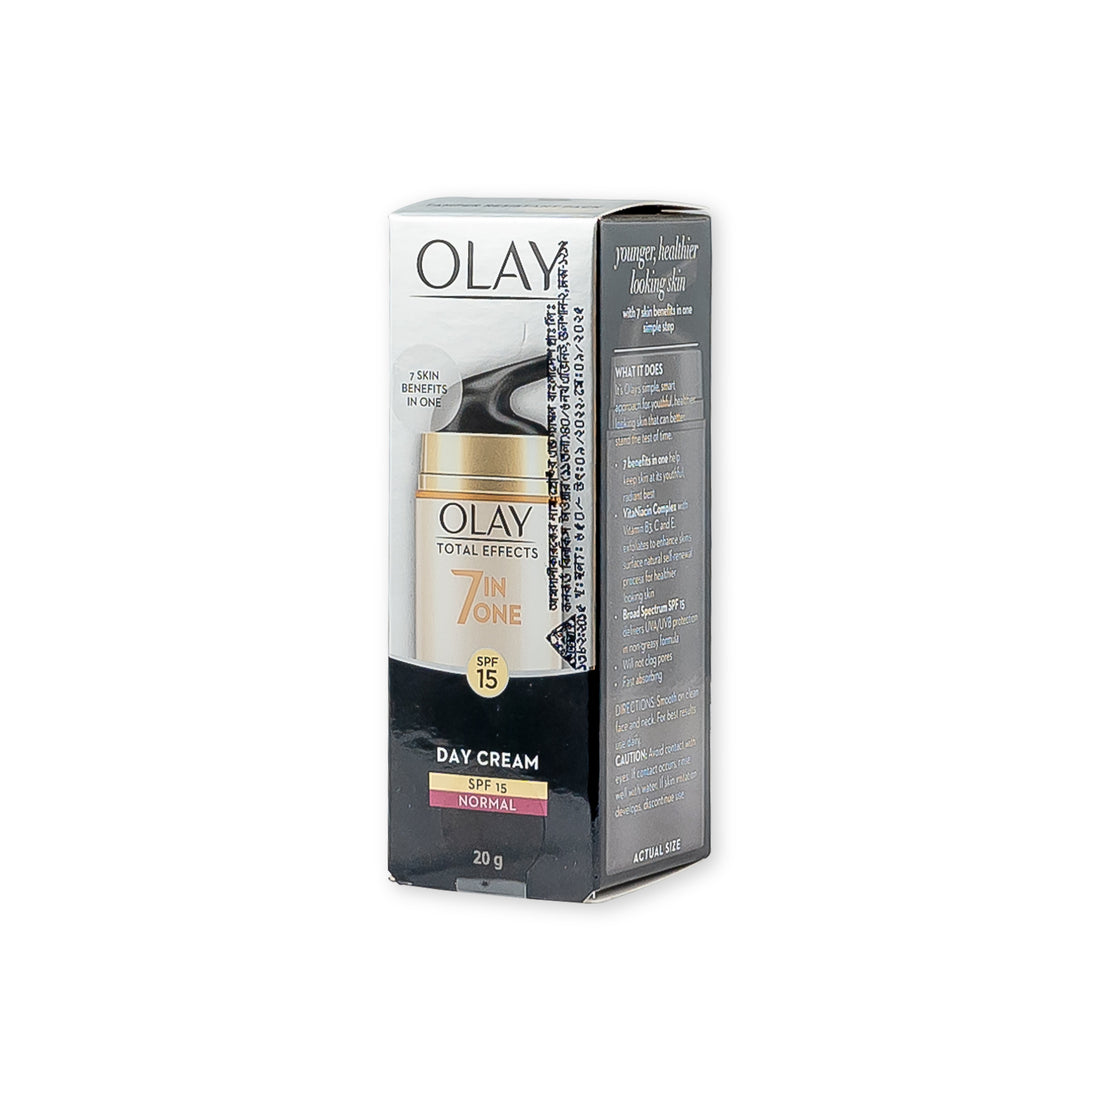 Olay Total Effects 7 in 1 Day Cream Normal SPF 15 (20gm)